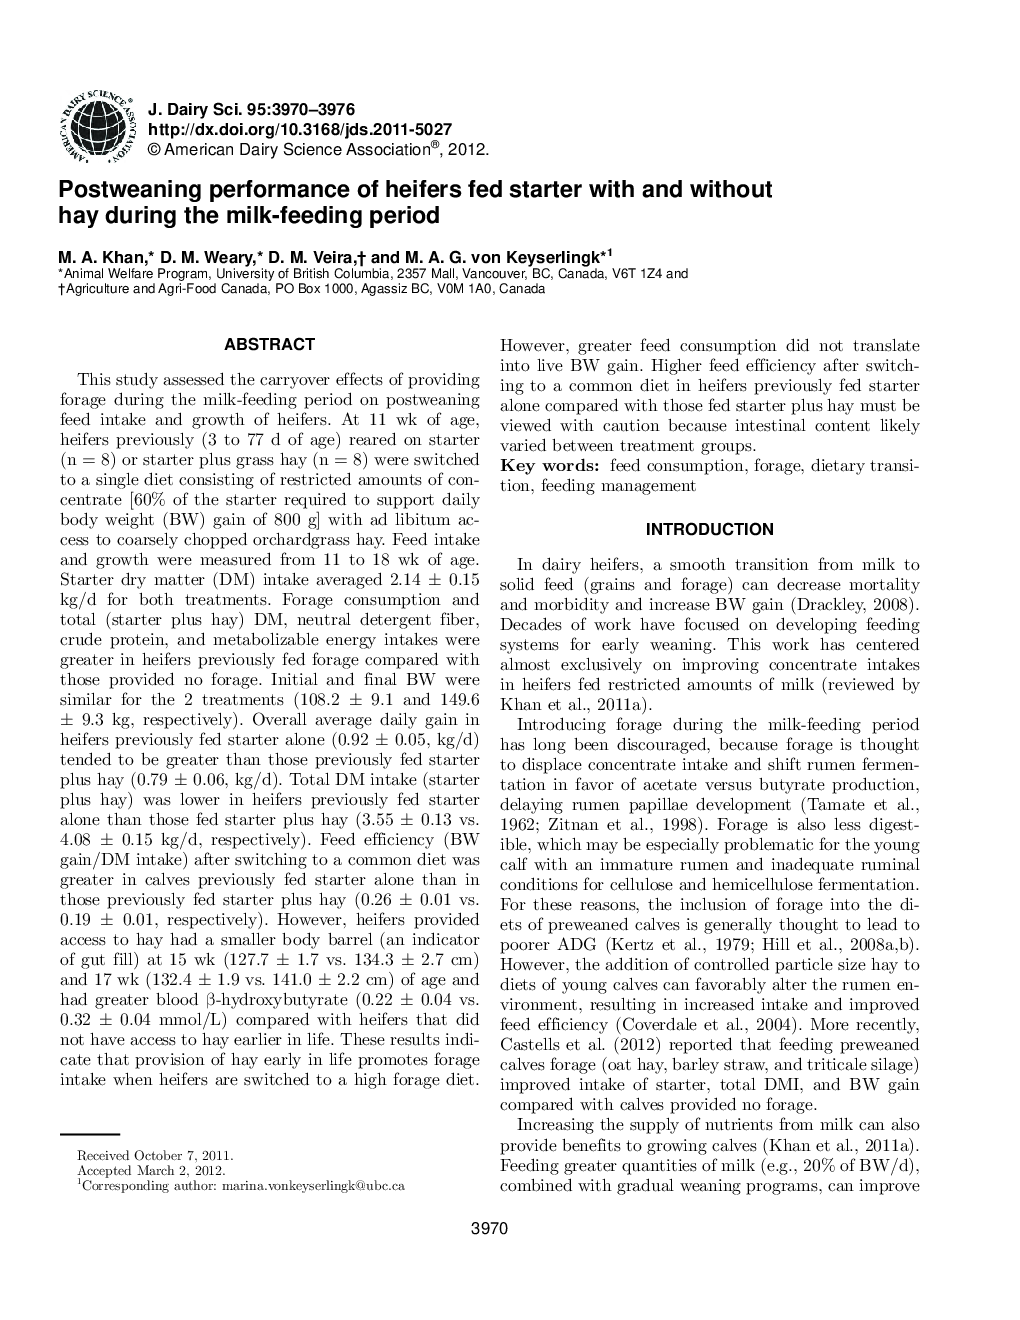 Postweaning performance of heifers fed starter with and without hay during the milk-feeding period